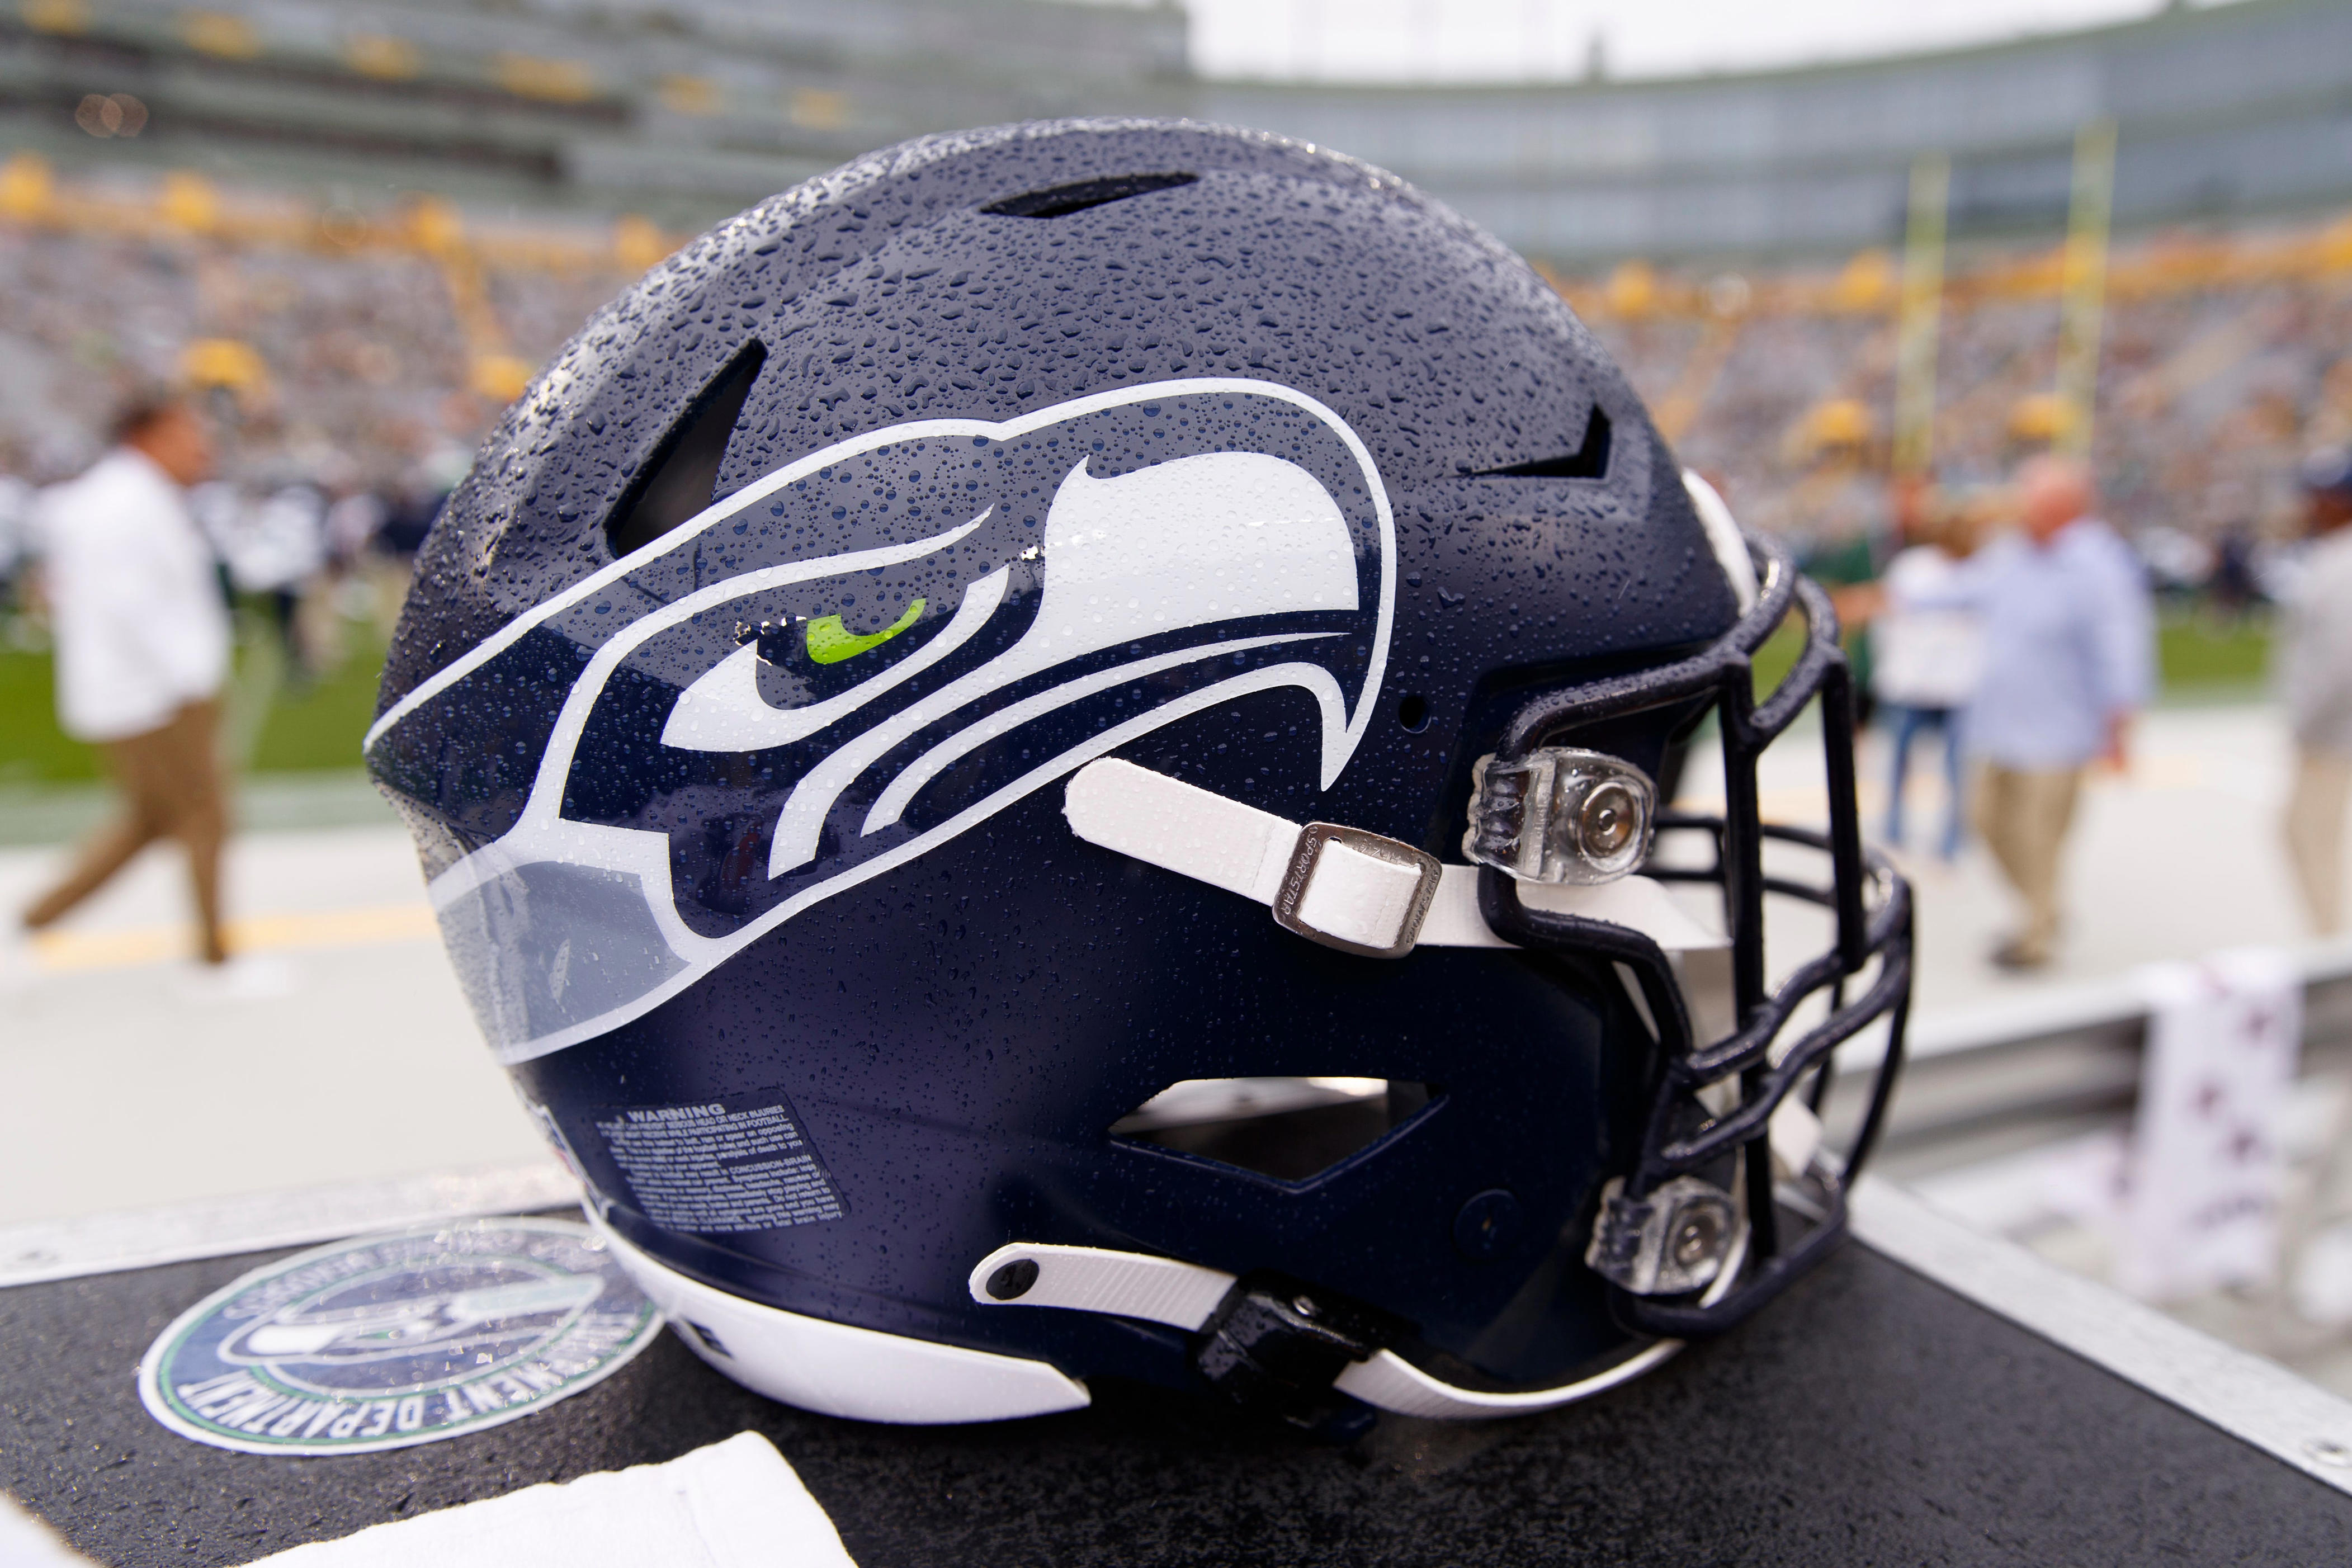 panthers reportedly request interview with seahawks' tracy smith for stc job